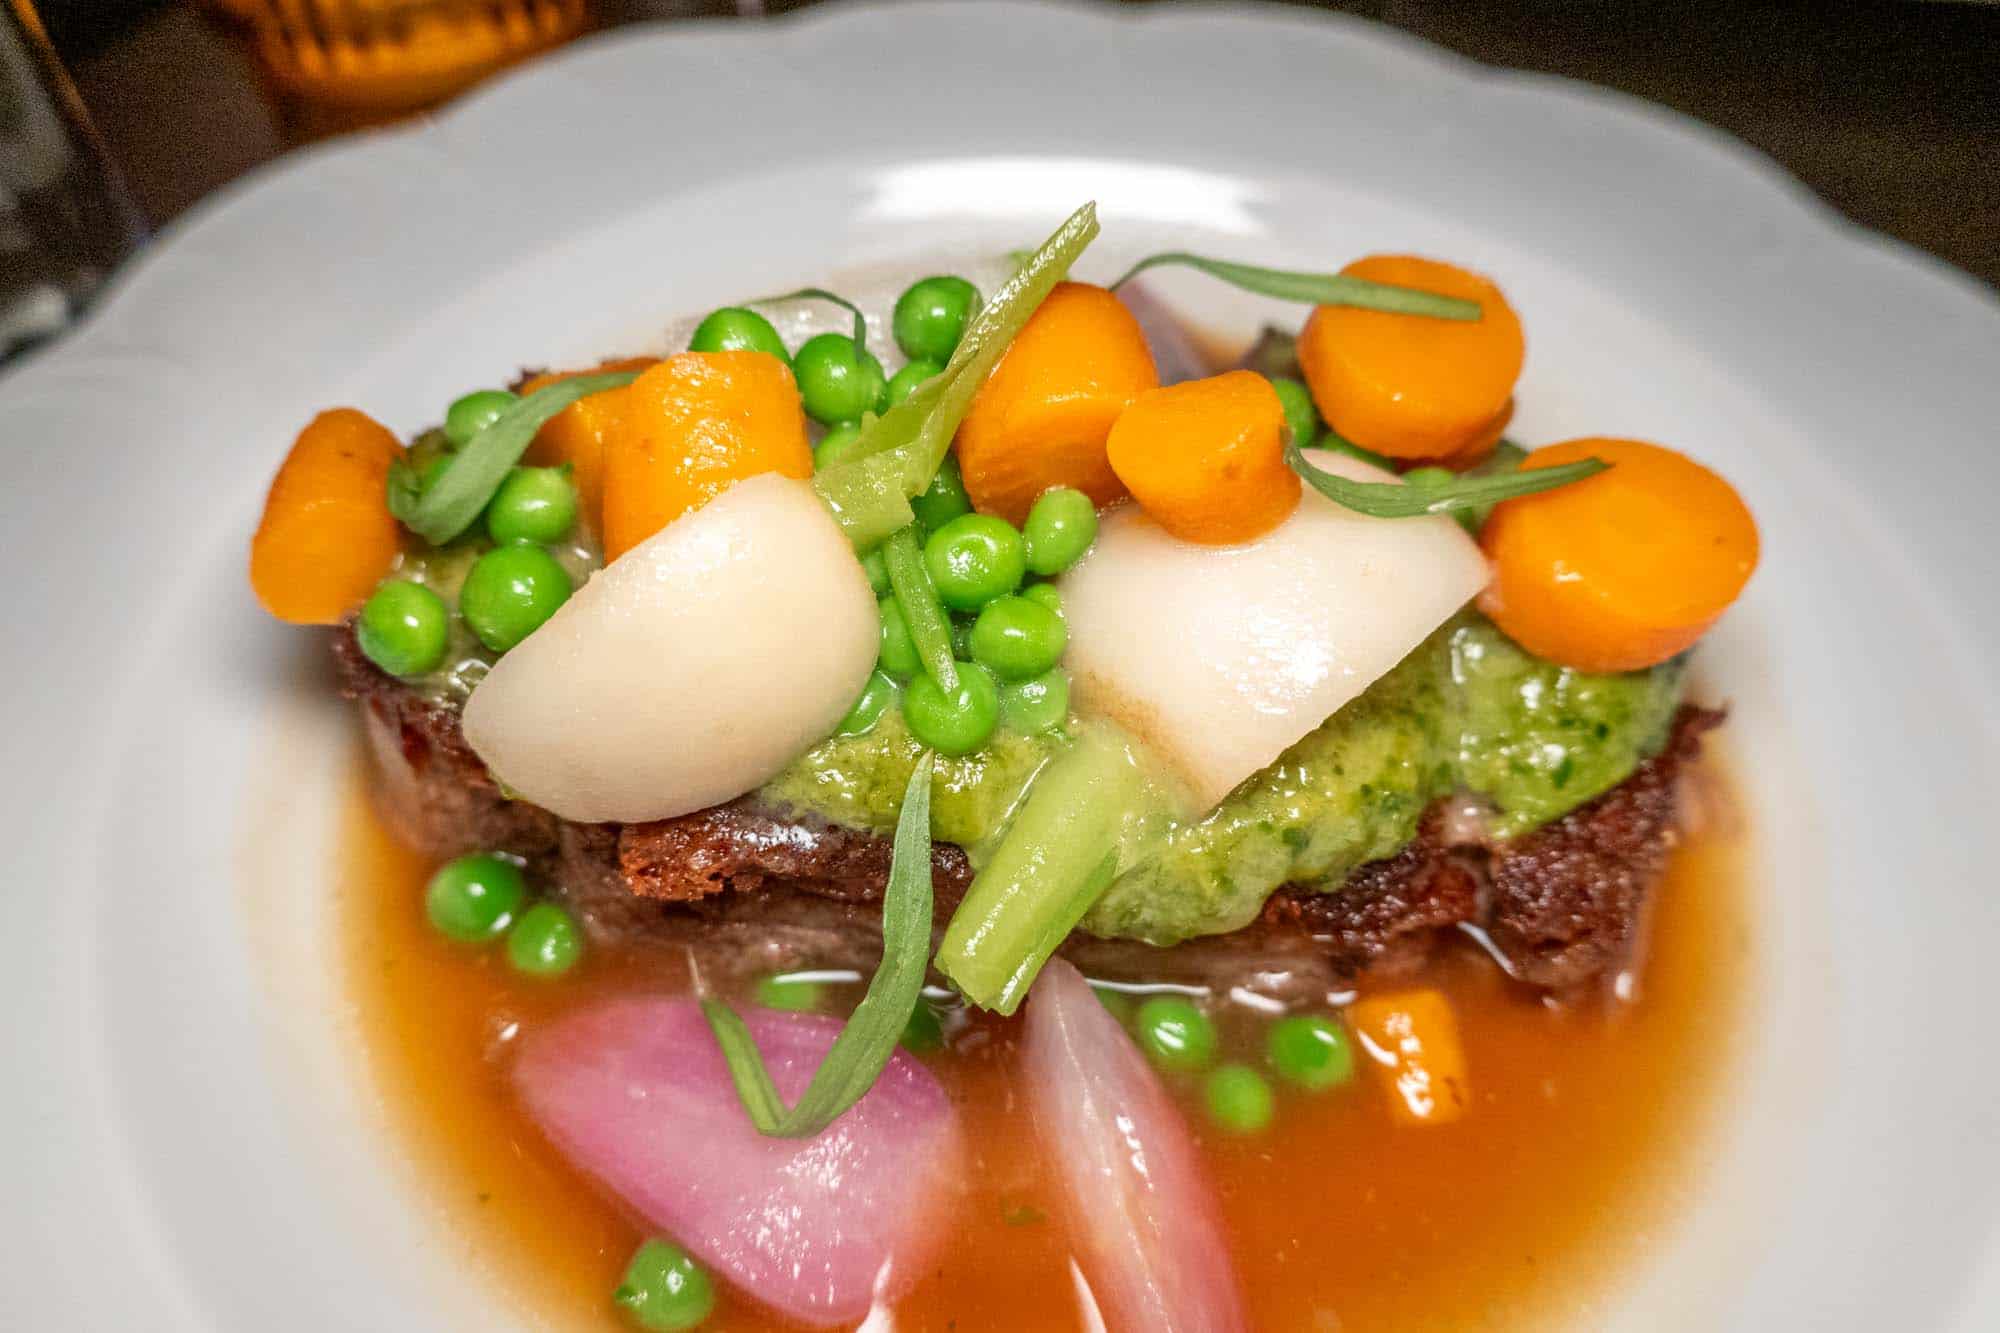 Roasted lamb shoulder topped with turnips, carrots, peas and shallots